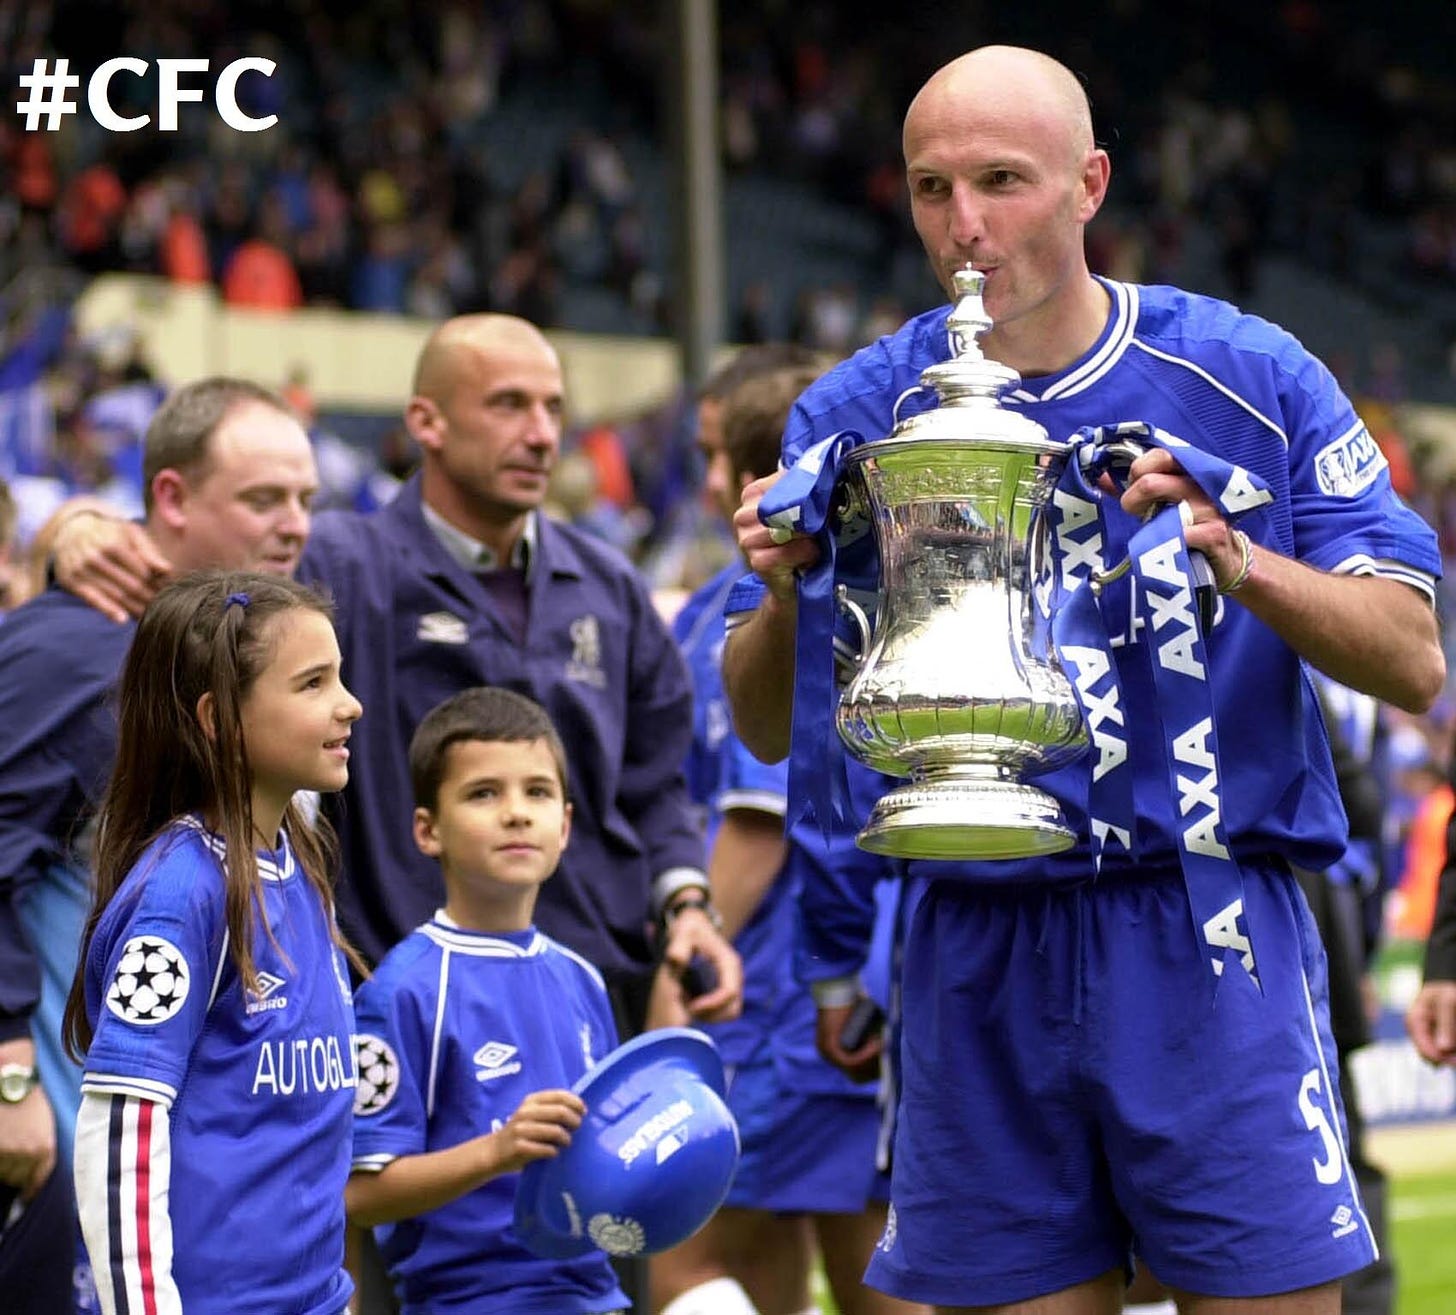 Chelsea FC on Twitter: "A very happy birthday to @chelseafc legend Frank  Leboeuf who turns 46 today! http://t.co/c9QEGC2VZa #CFC  http://t.co/Msu7KCSAI5" / Twitter